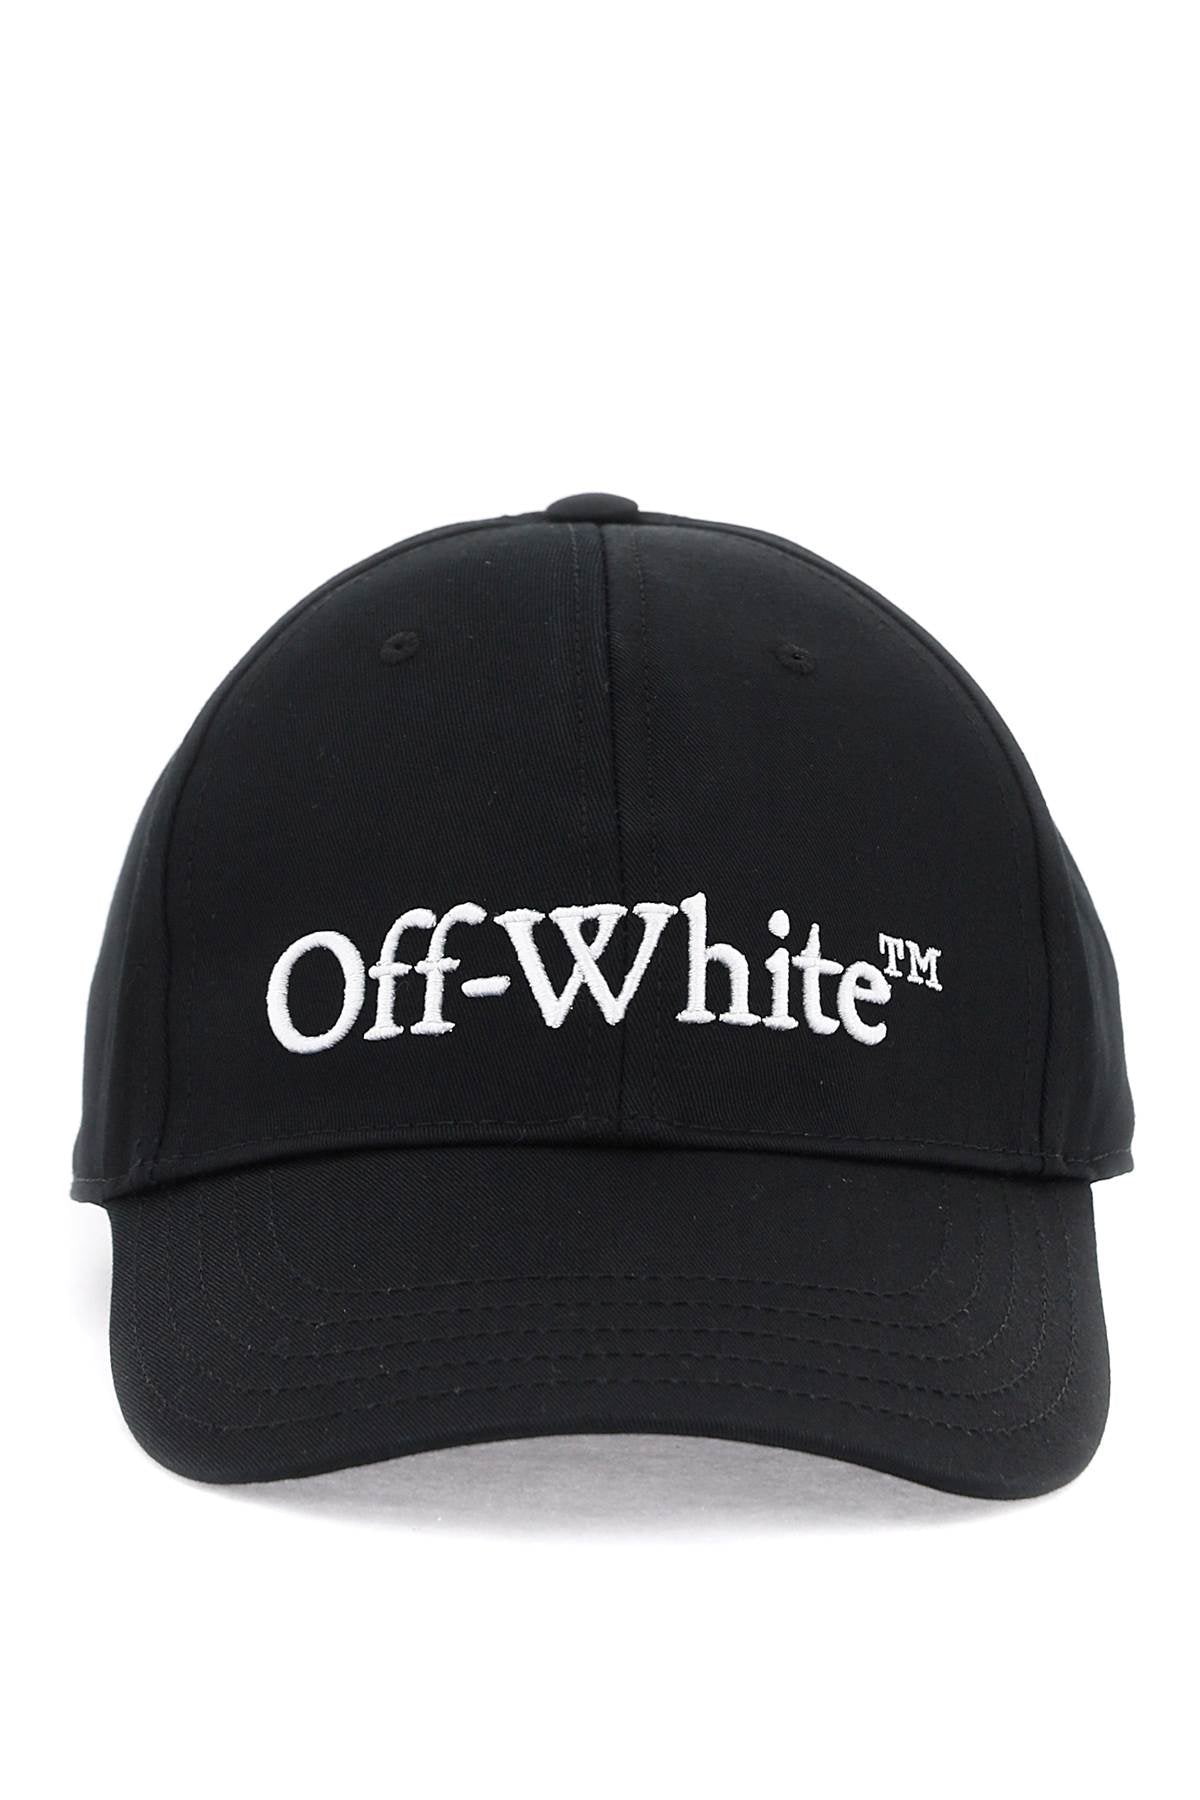 Off-white embroidered logo baseball cap with OWLB044C99FAB001 BLACK WHITE